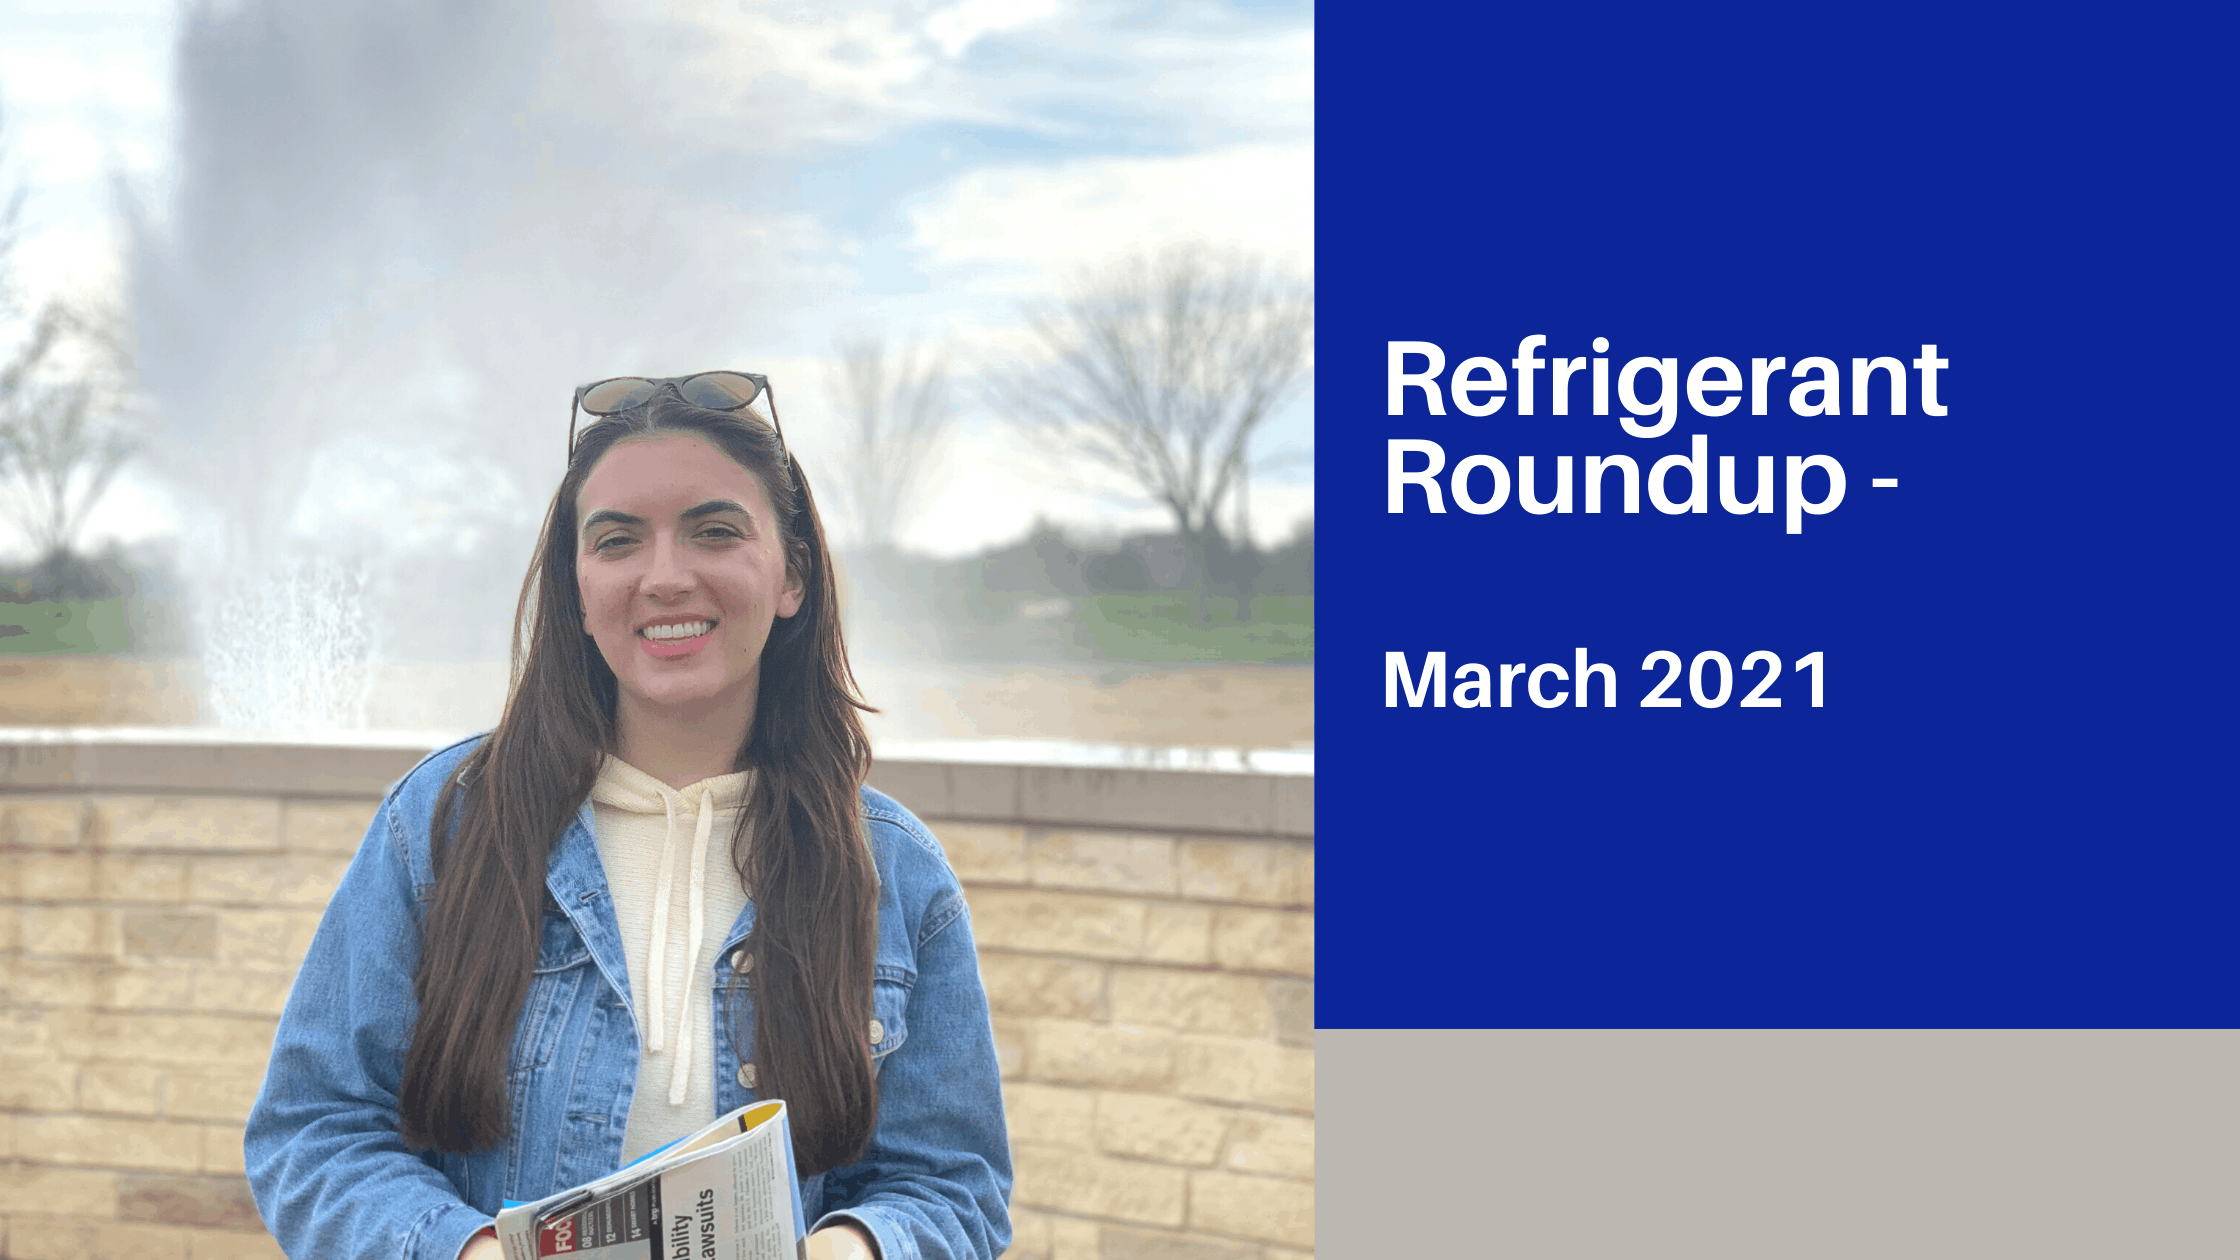 Read more about the article Refrigerant Roundup for March 2021